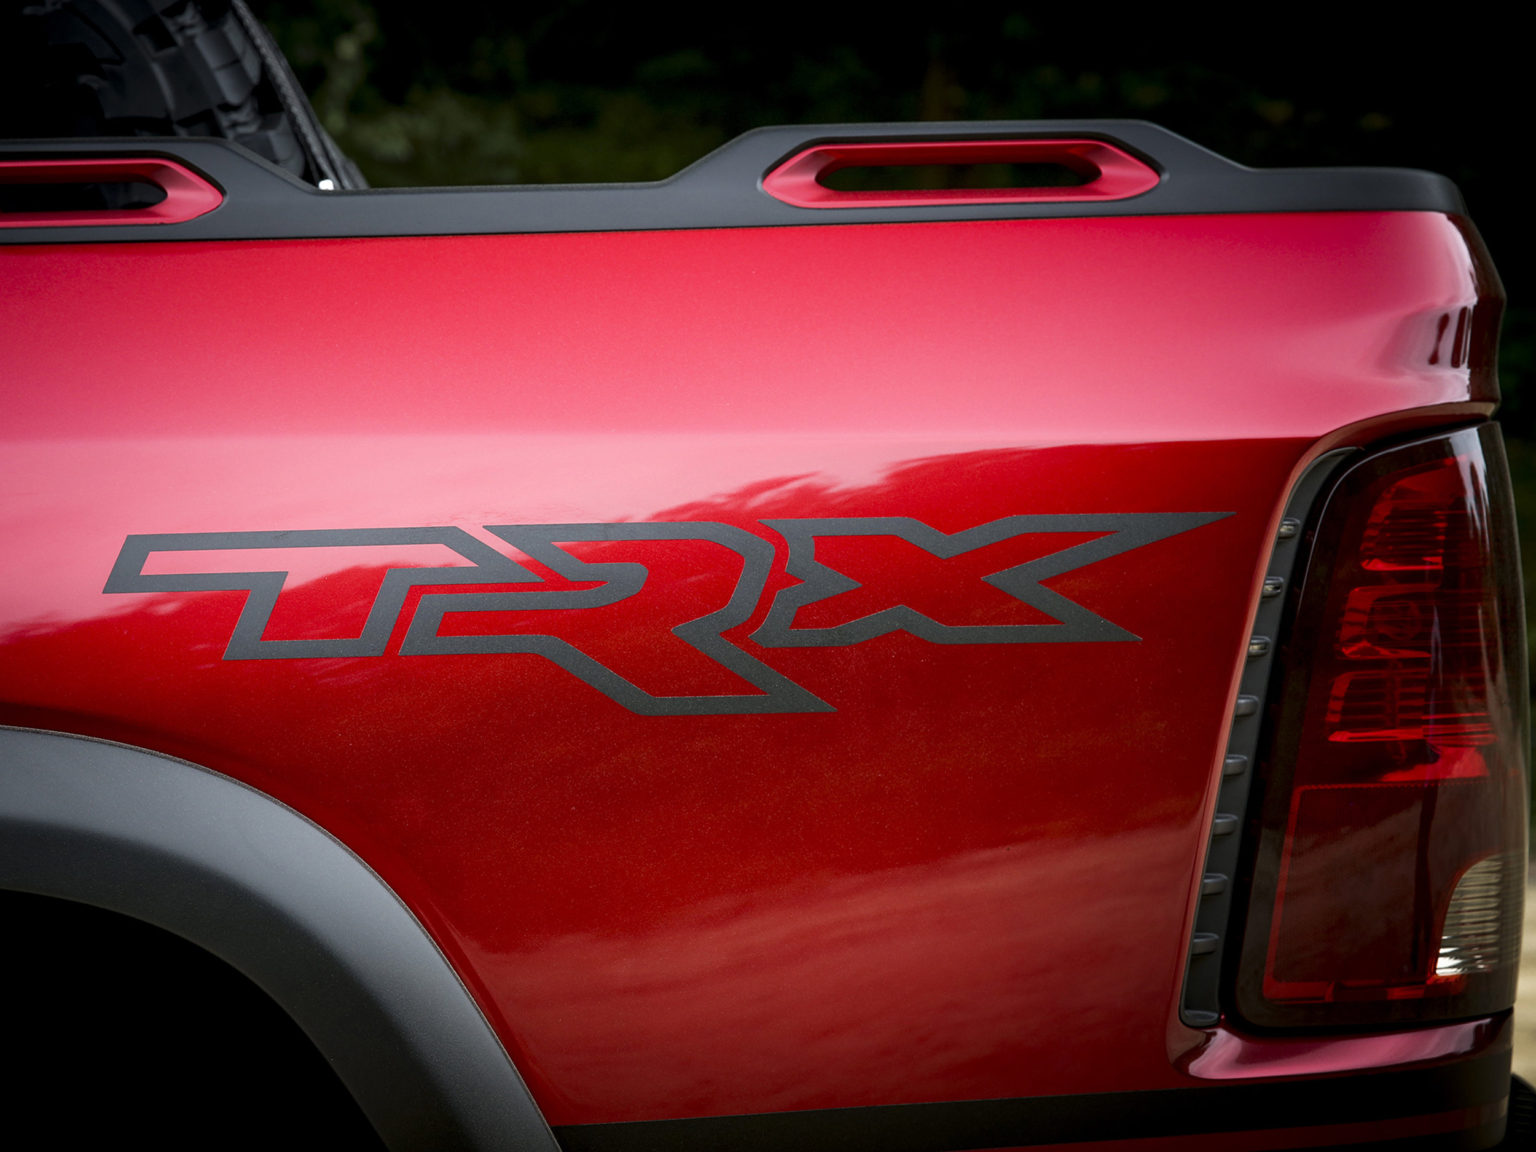 The Ram Rebel TRX Concept was first shown in 2017, it hinted that a Ford Raptor-fighter was on the way.